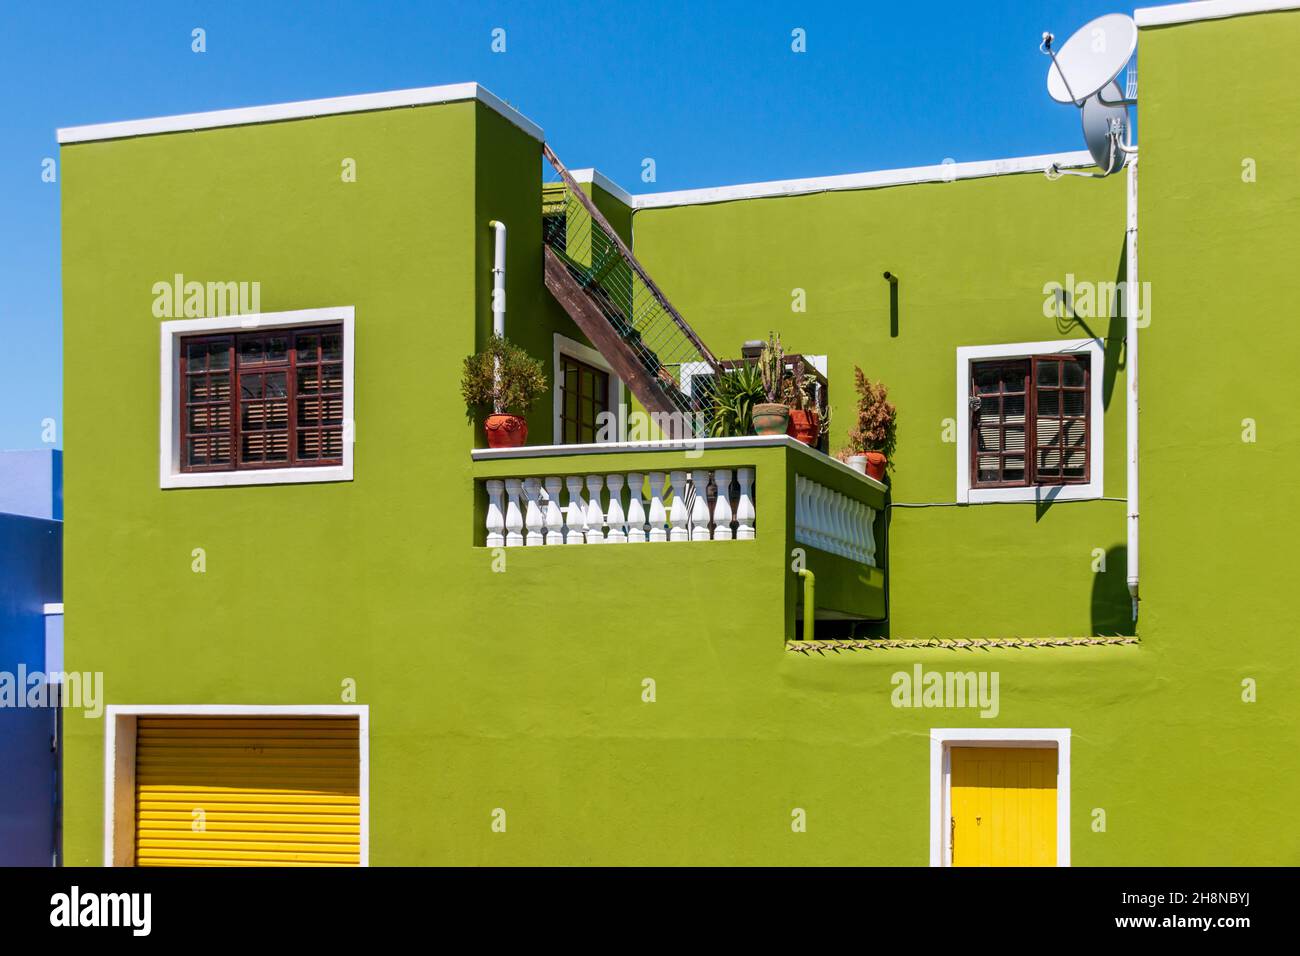 Colorful facades of old houses in olive green, Bo Kaap Malay Quarter, Cape Town, South Africa Stock Photo